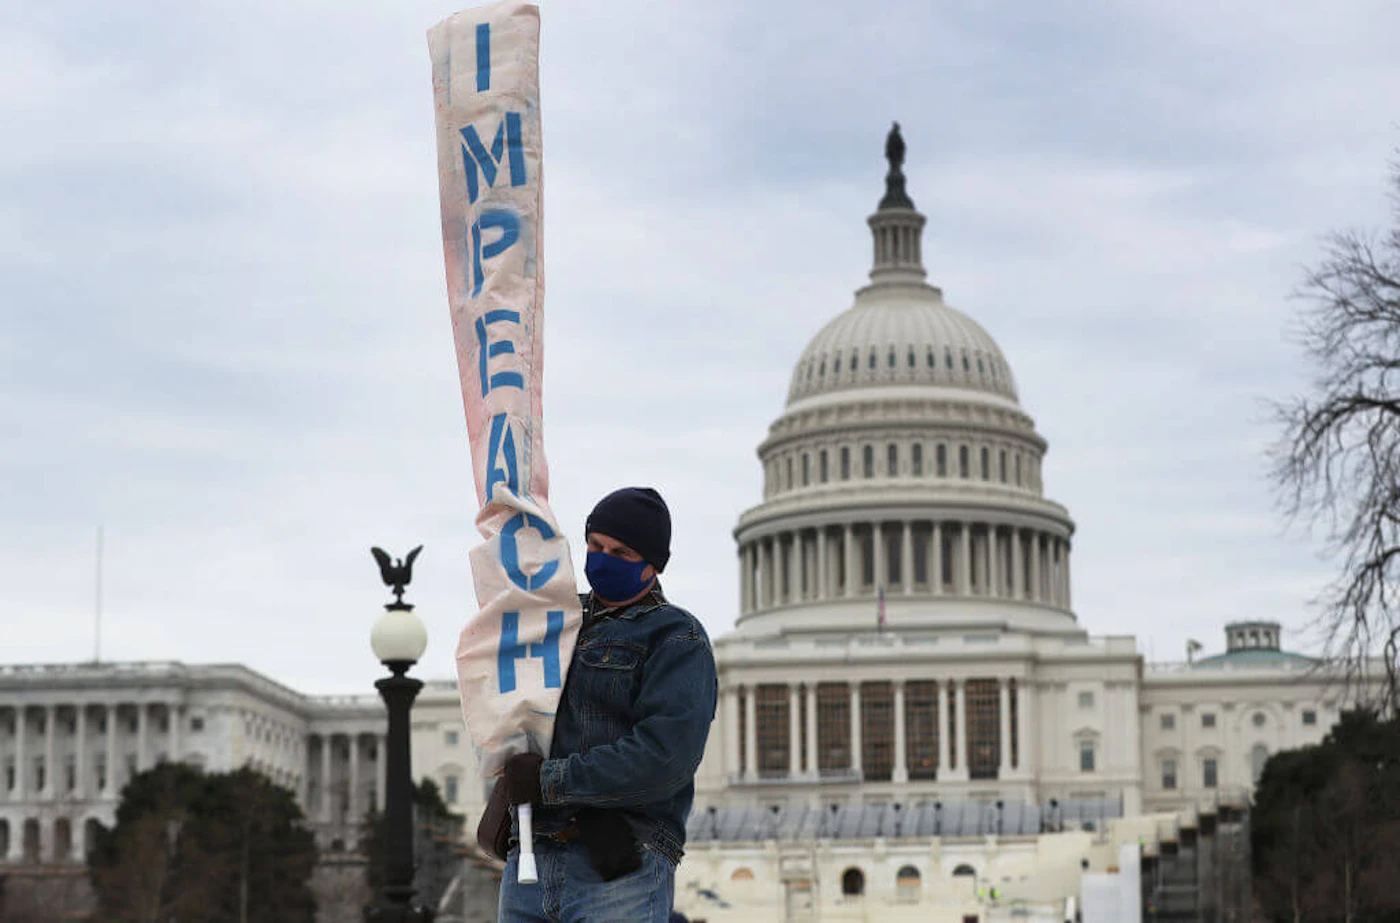 WASHINGTON, DC - JANUARY 08: Bill Zawacki carries a banner that reads "impeach" near the U.S. Capitol Building, two days after a pro-Trump mob broke into the building on January 08, 2021 in Washington, DC. Democratic congressional leaders threatened to impeach President Donald Trump for encouraging the mob that stormed the Capitol Building. (Photo by Joe Raedle/Getty Images)